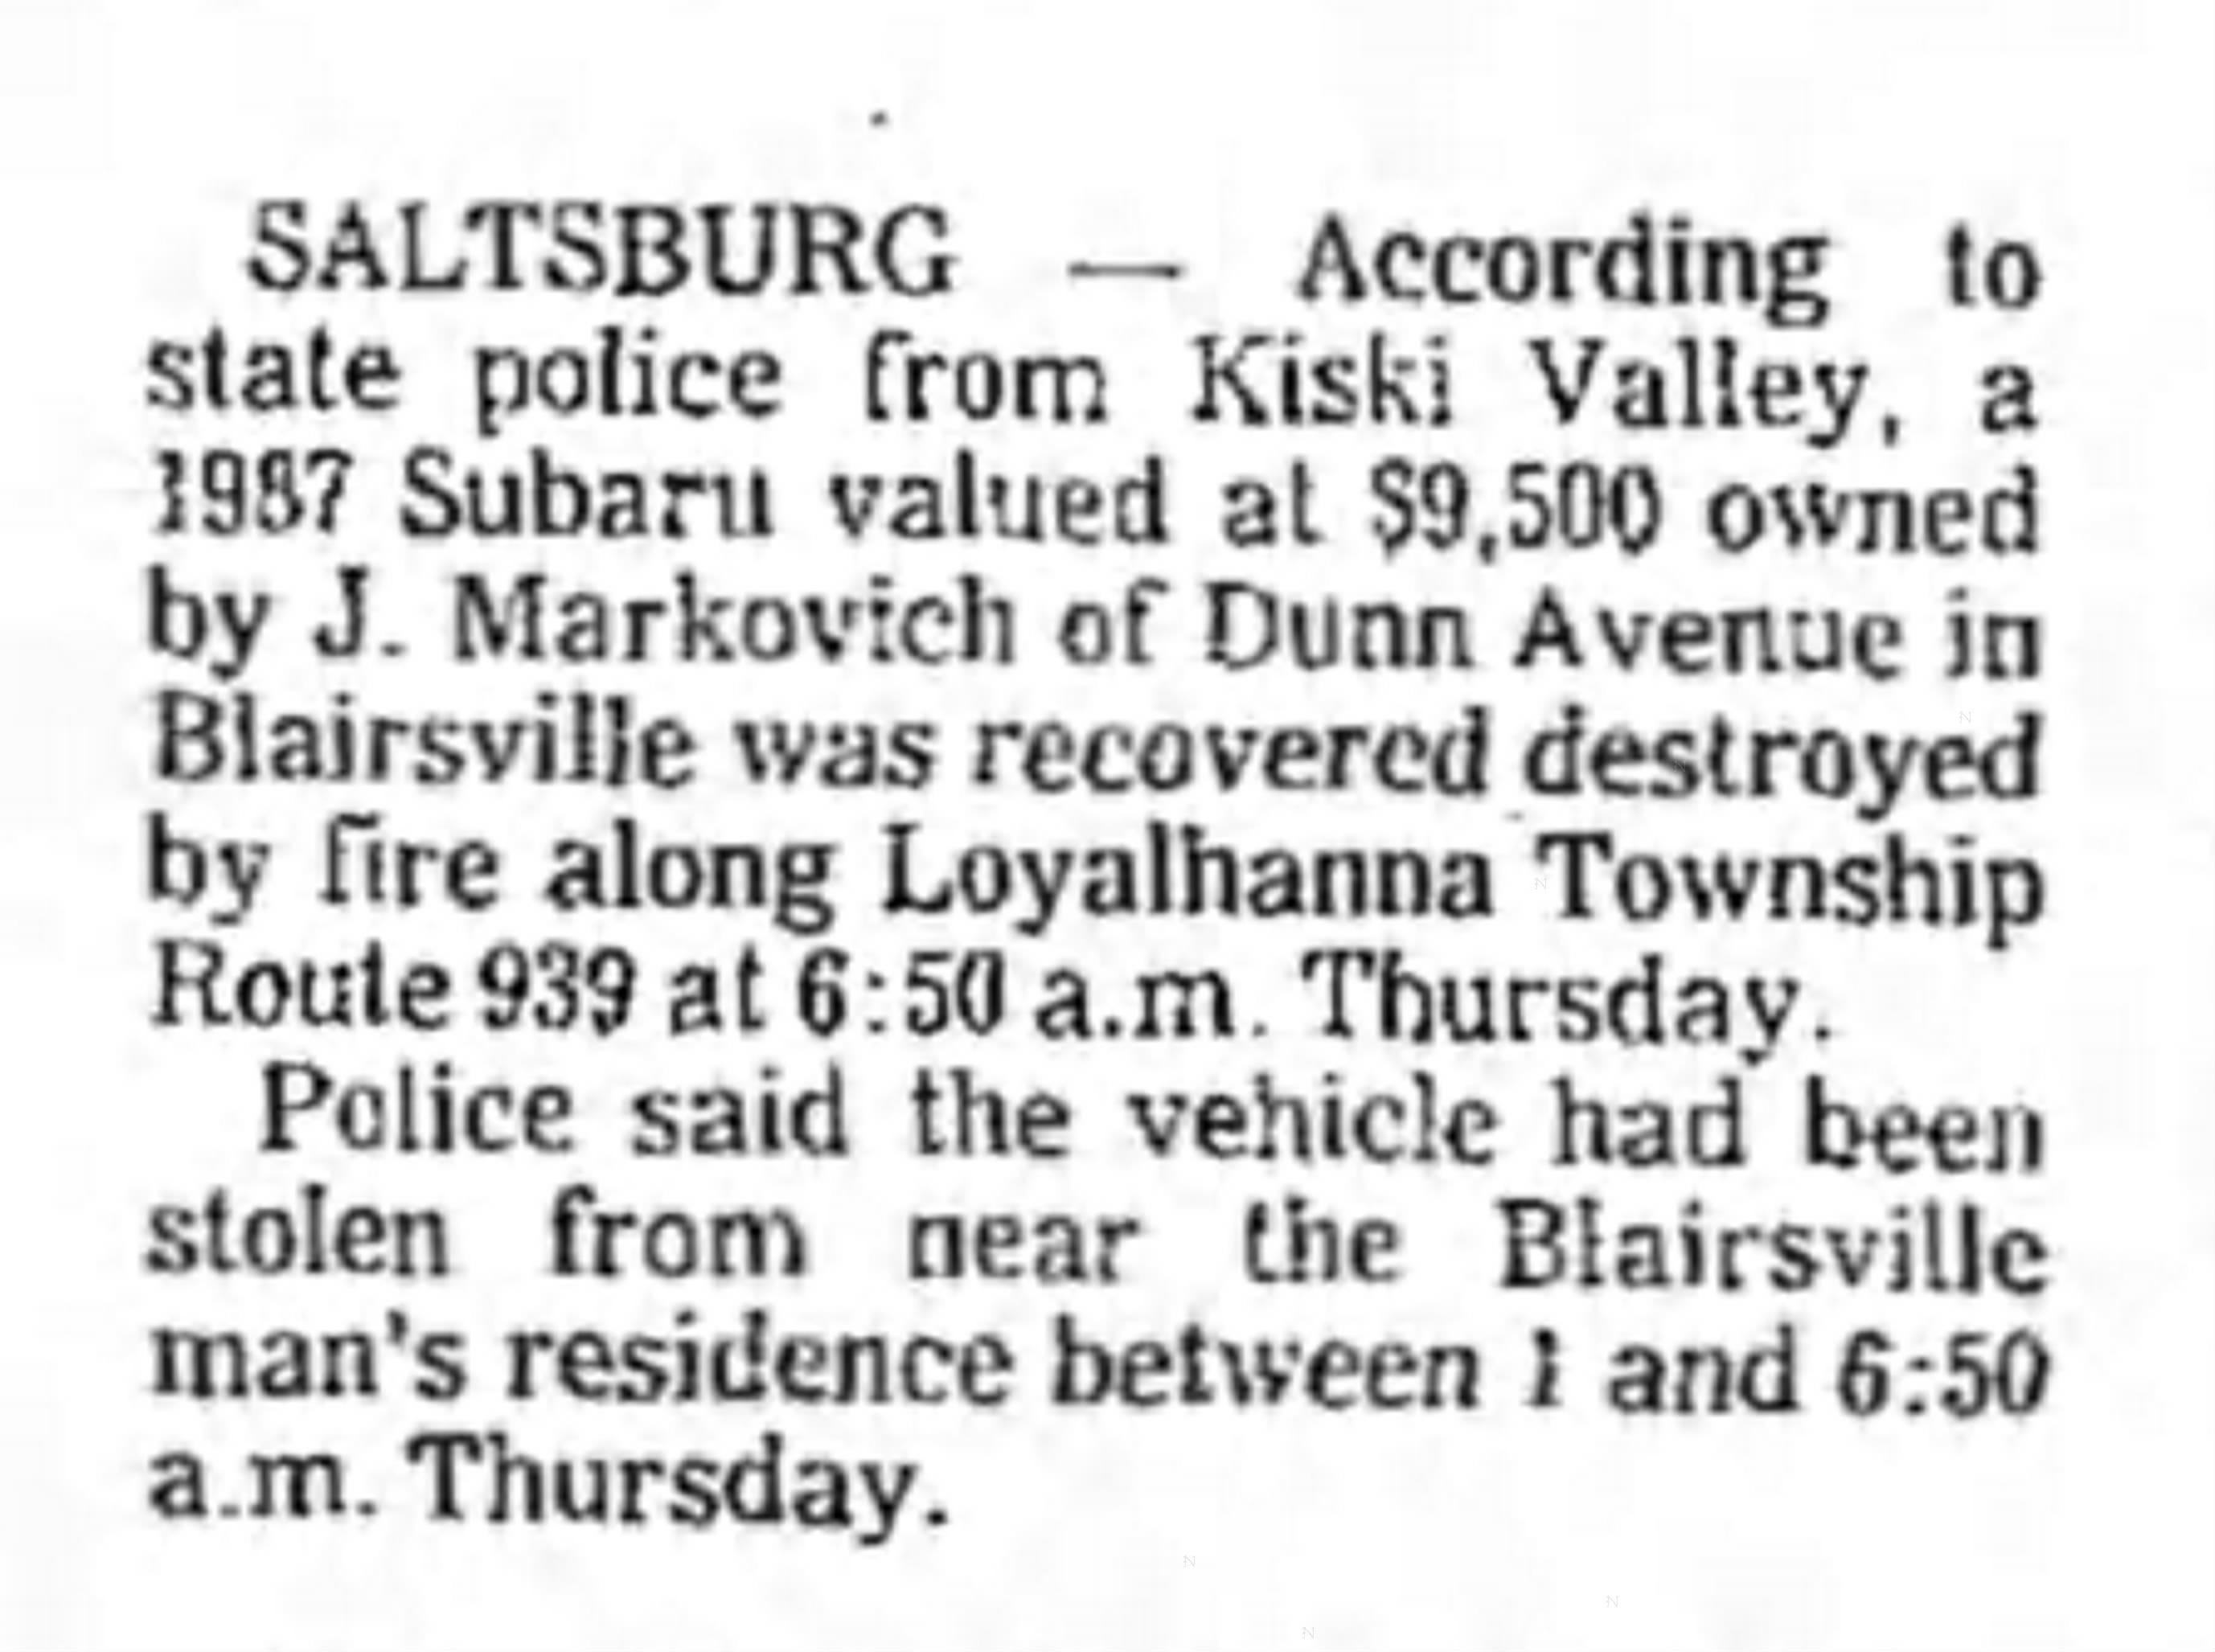 A police blotter item published in the May 6, 1988 edition of the Indiana Gazette newspaper briefly describes the theft and destruction of a vehicle owned by John Markovich.